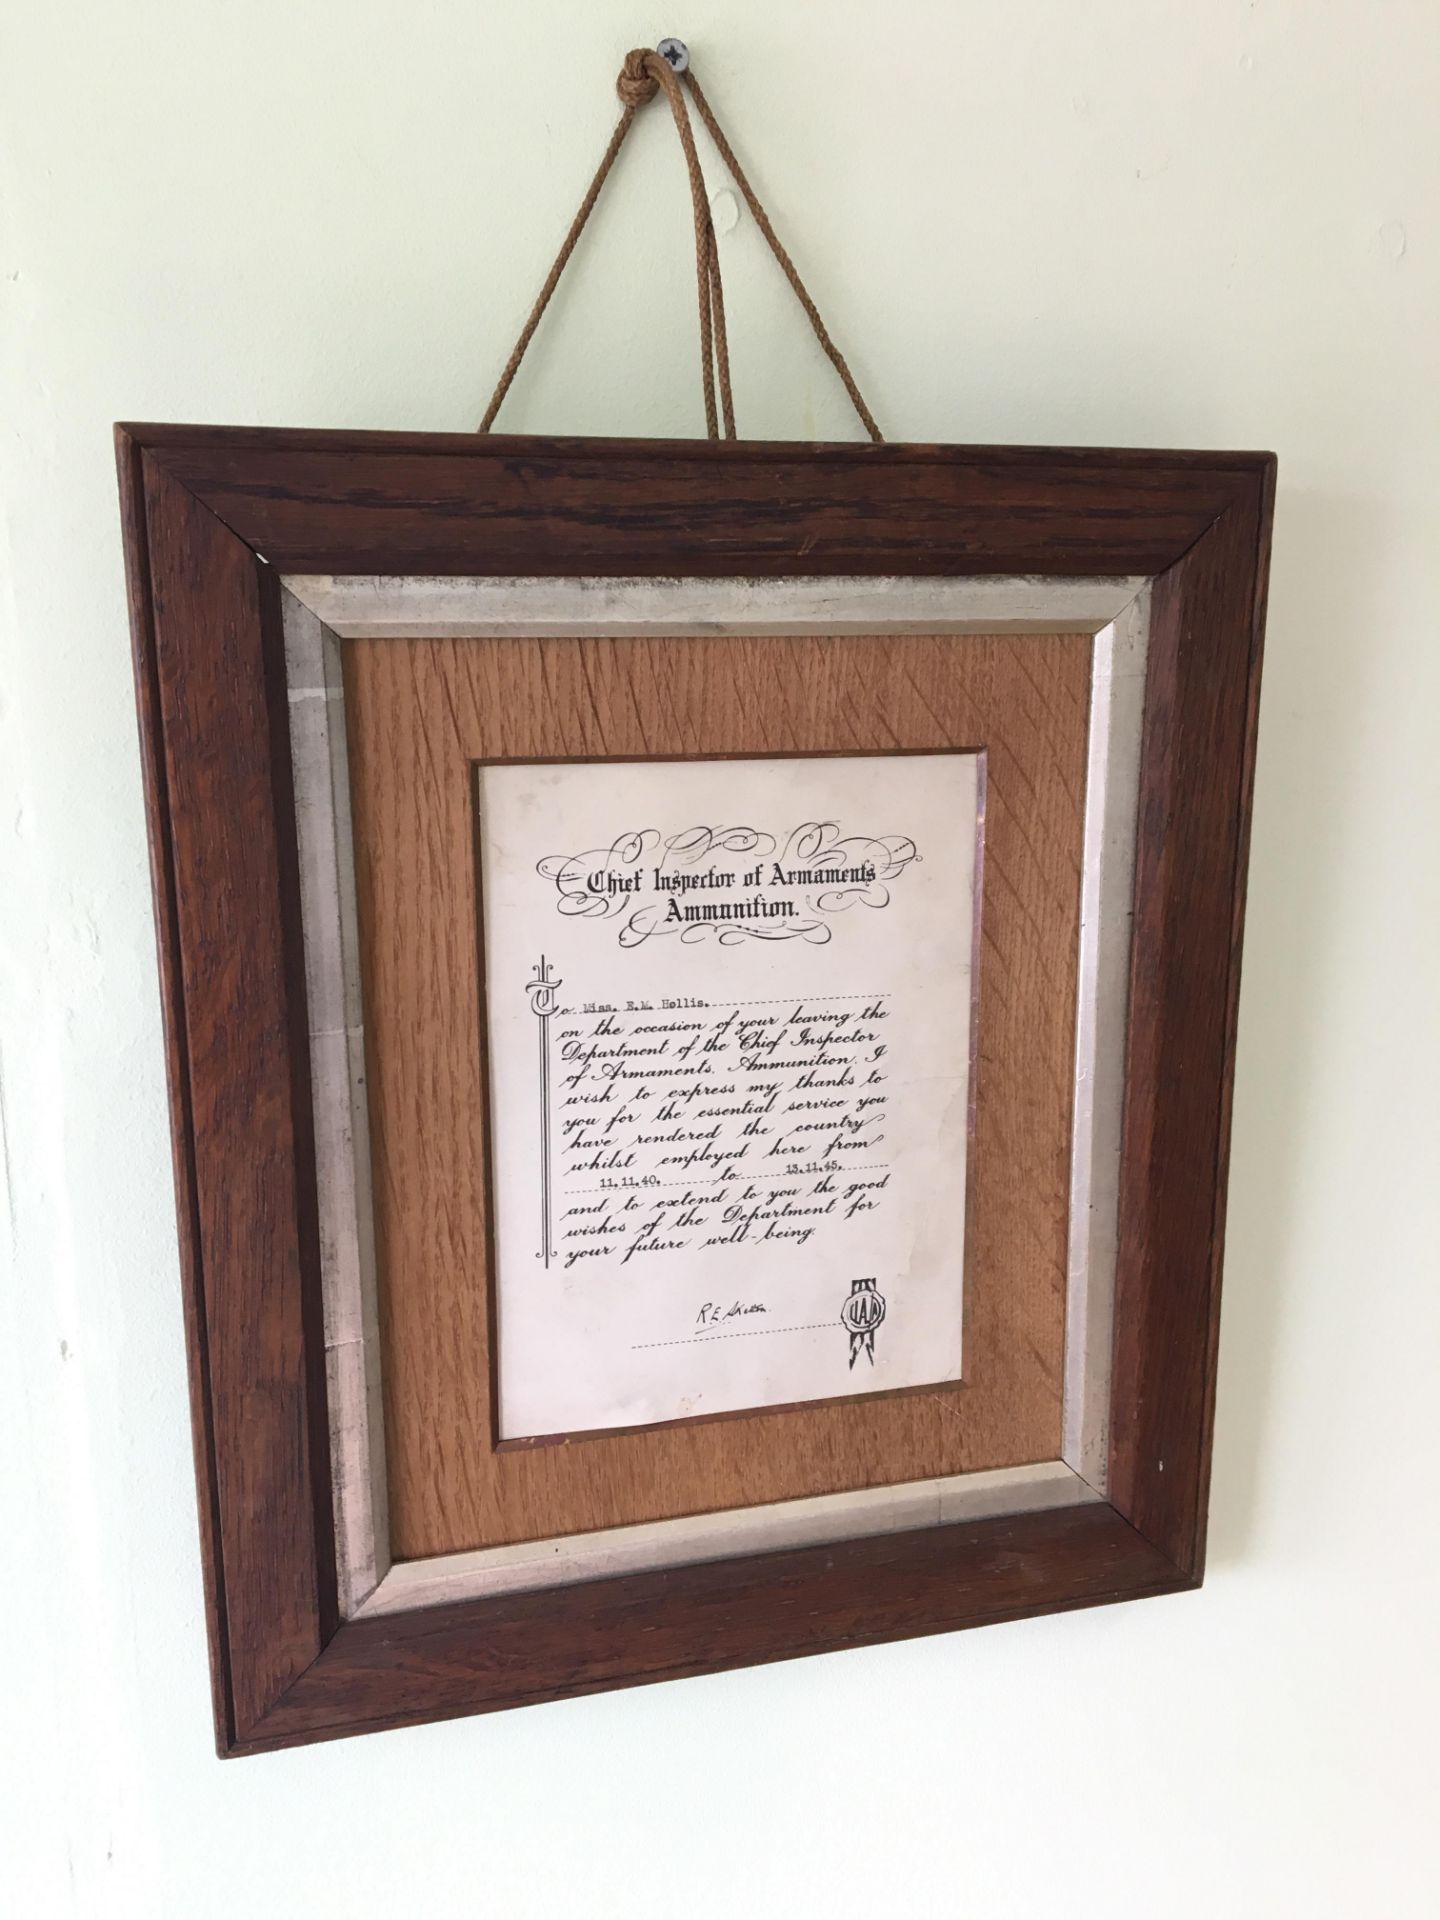 A FRAMED WW2 CERTIFICATE DATED 1945 FROM THE CHIEF INSPECTOR OF ARMAMENTS AMMUNITION - WOMEN IN